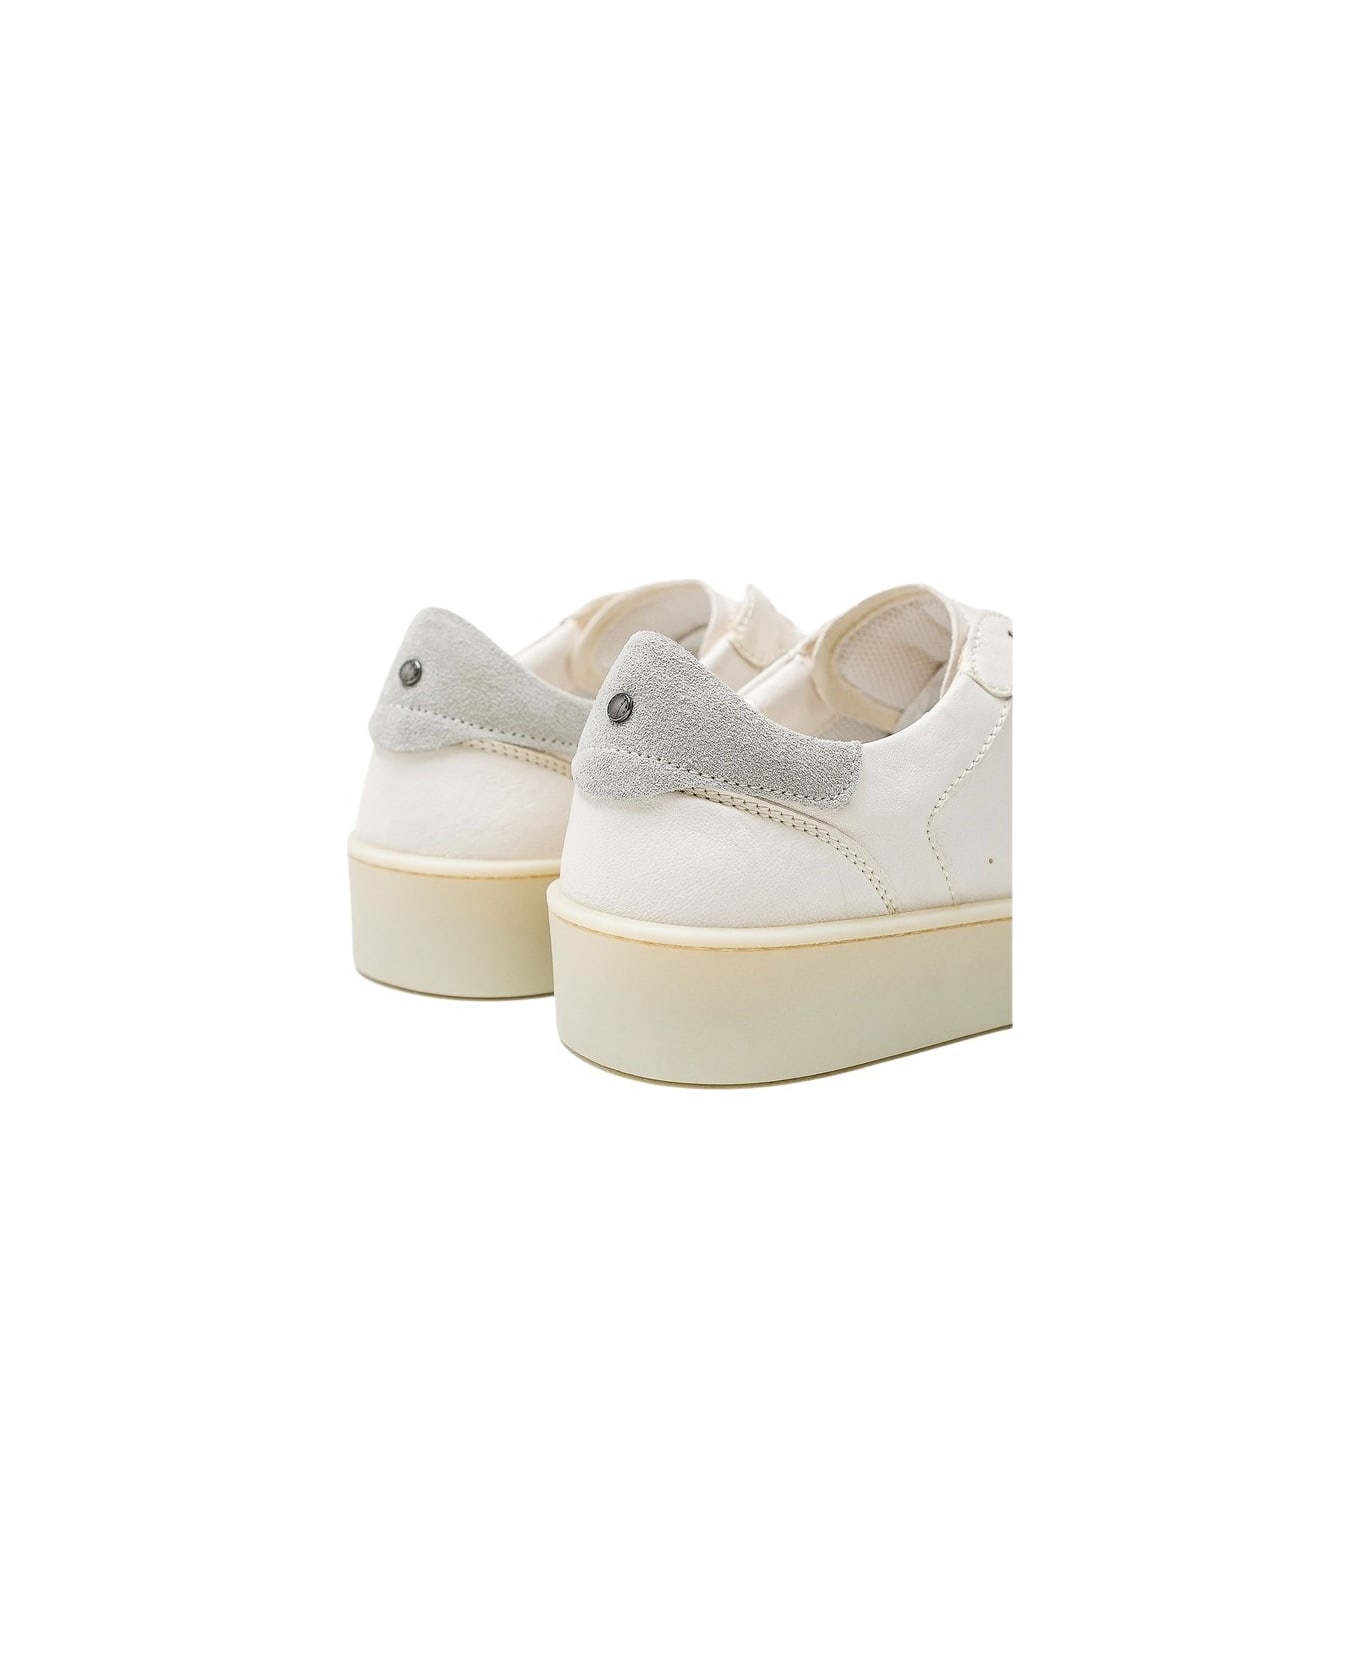 Canali Sneakers - White スニーカー